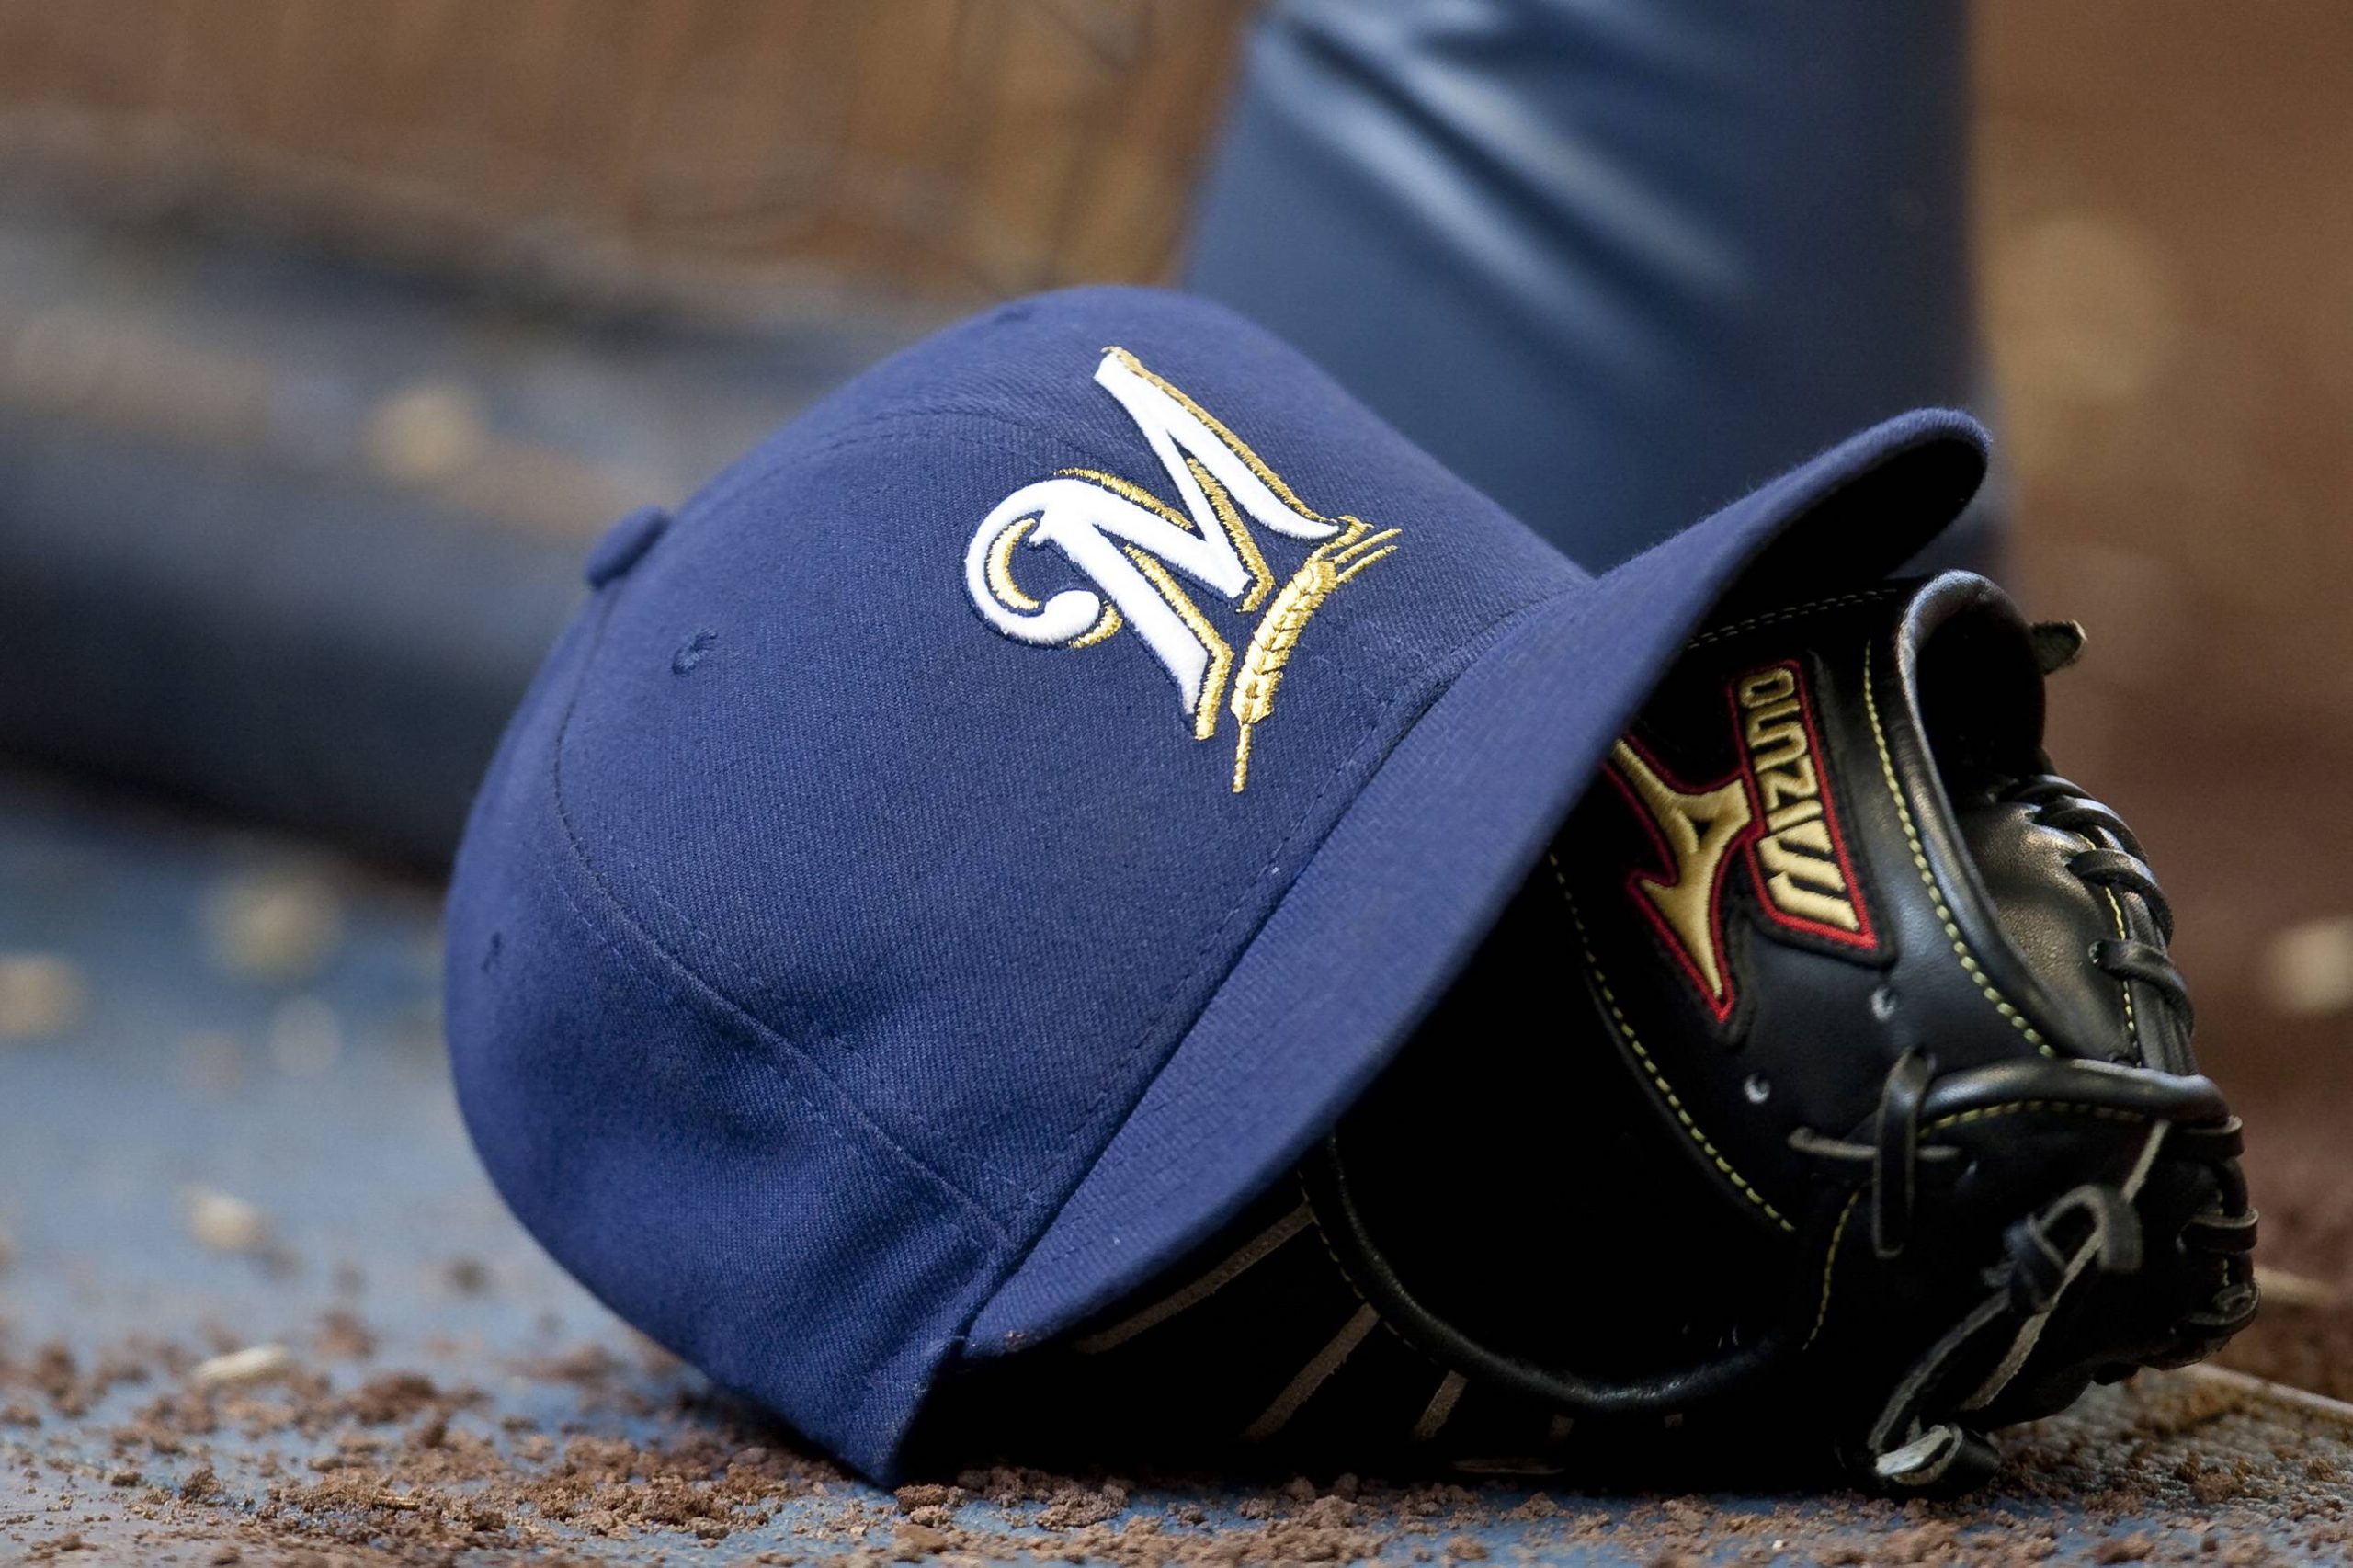 Complete Milwaukee Brewers MLB schedule for the 2021 season